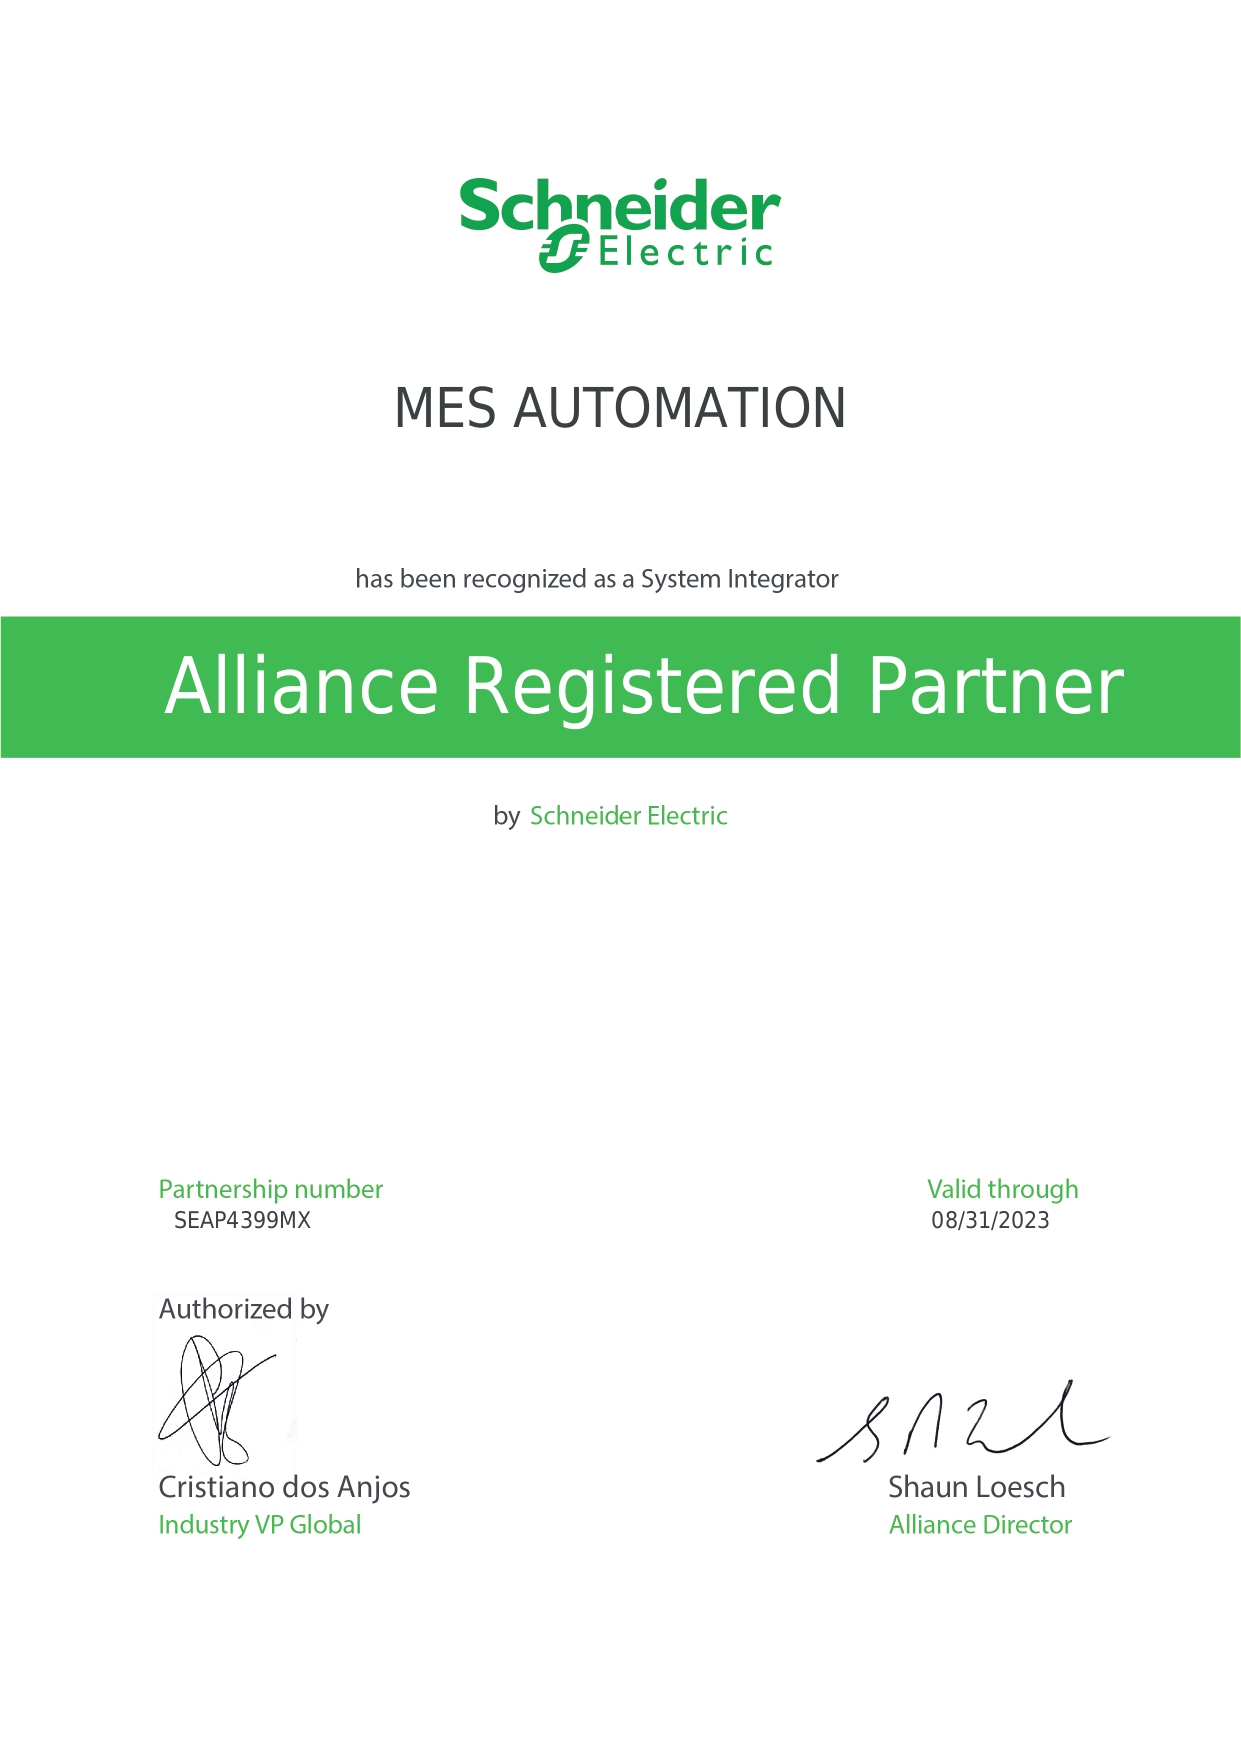 MES AUTOMATION-certificate-alliance